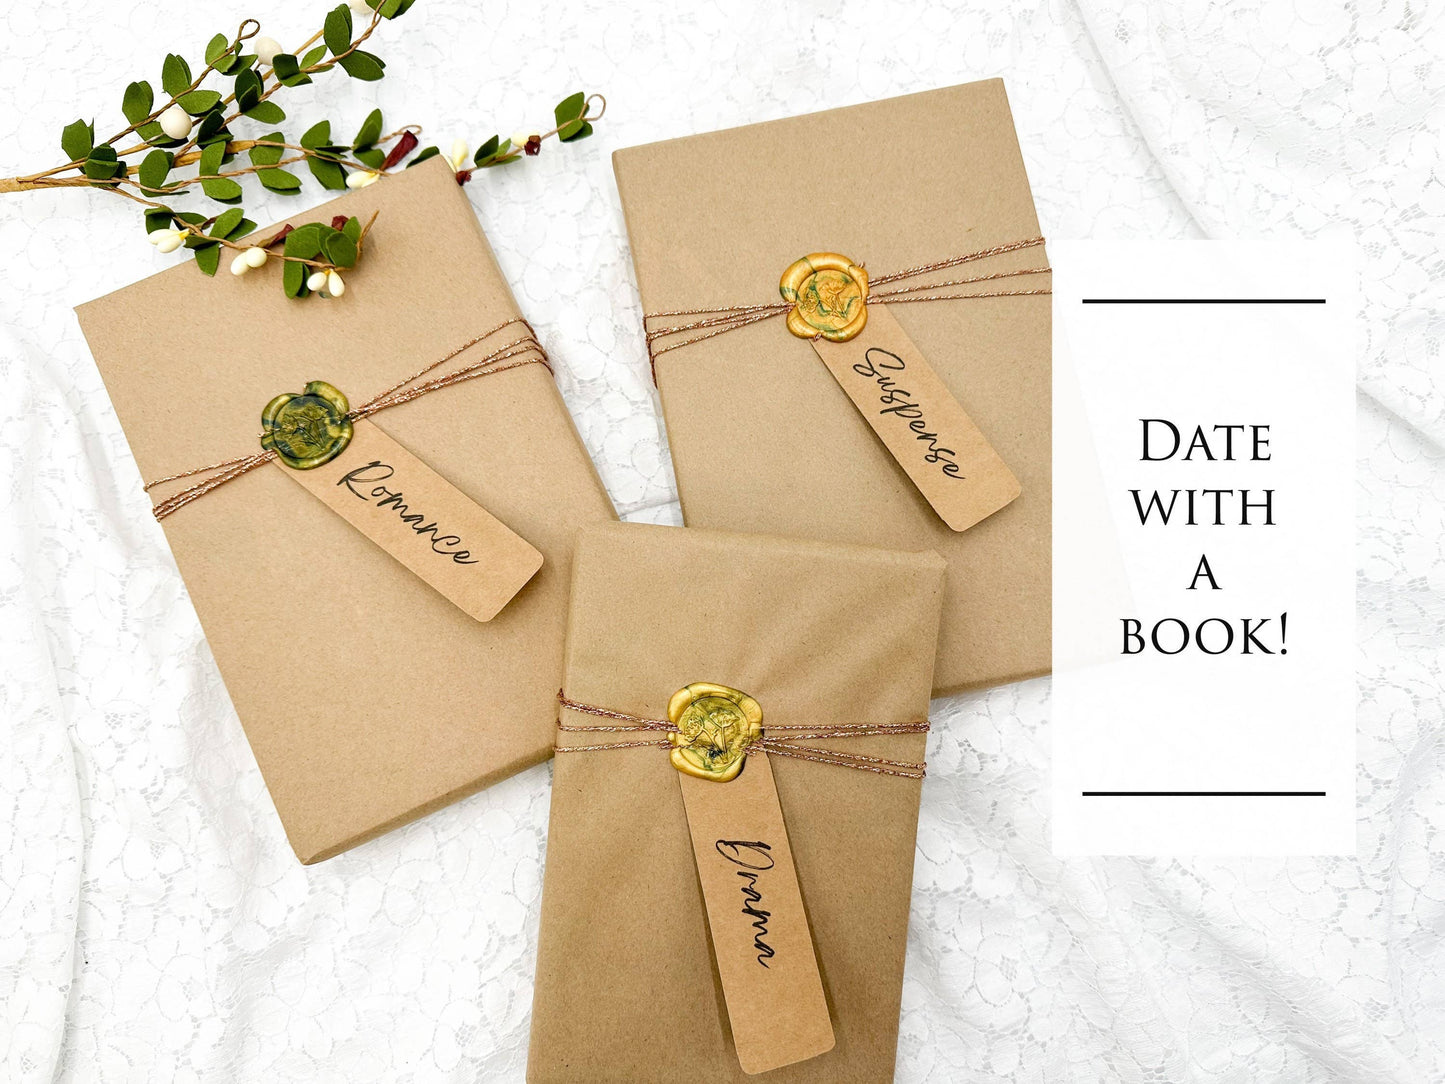 A House of Books - Surprise Book Blind Date with a Book-Drama